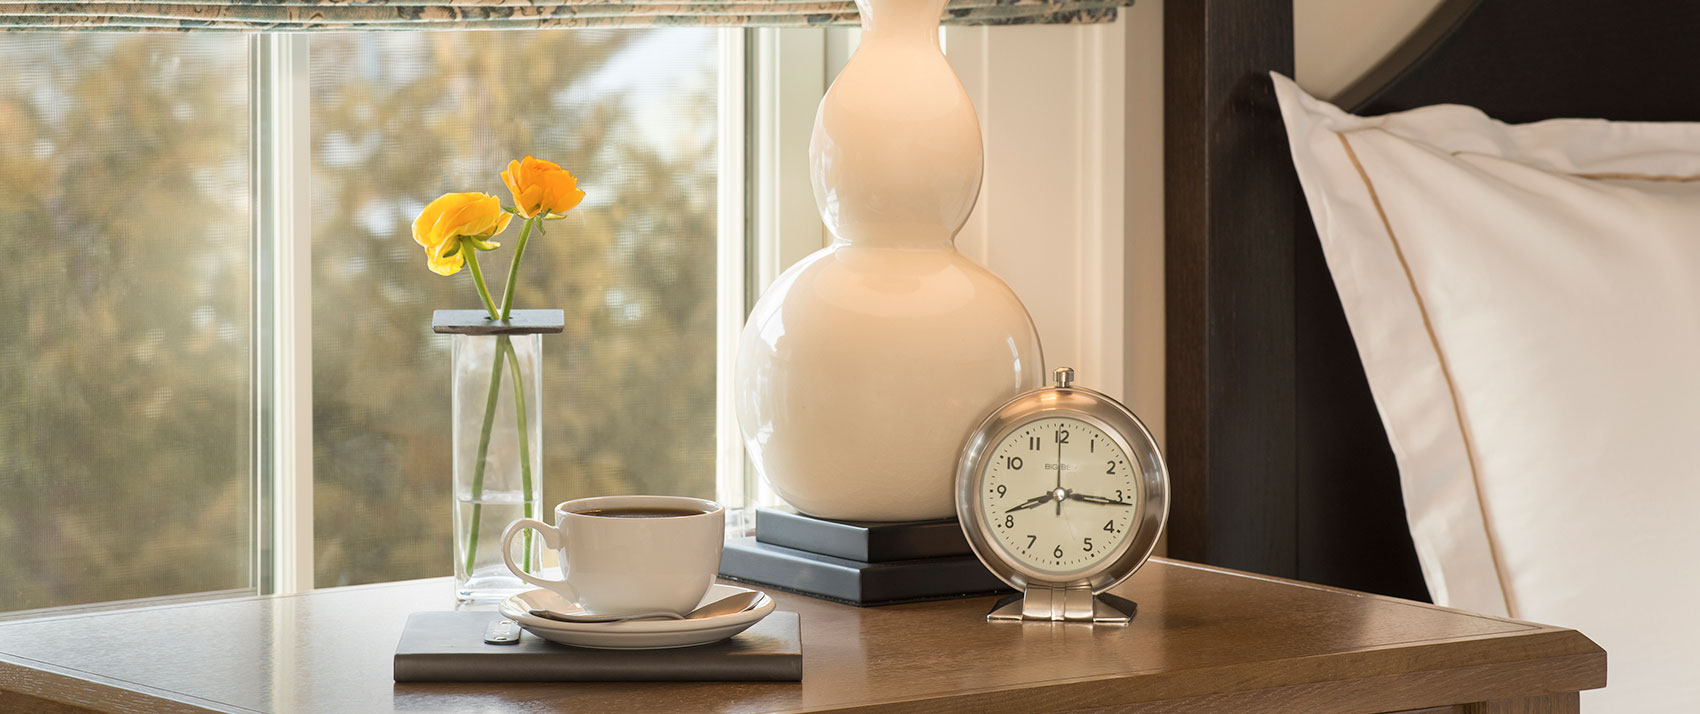 coffee and clock on a bedside table